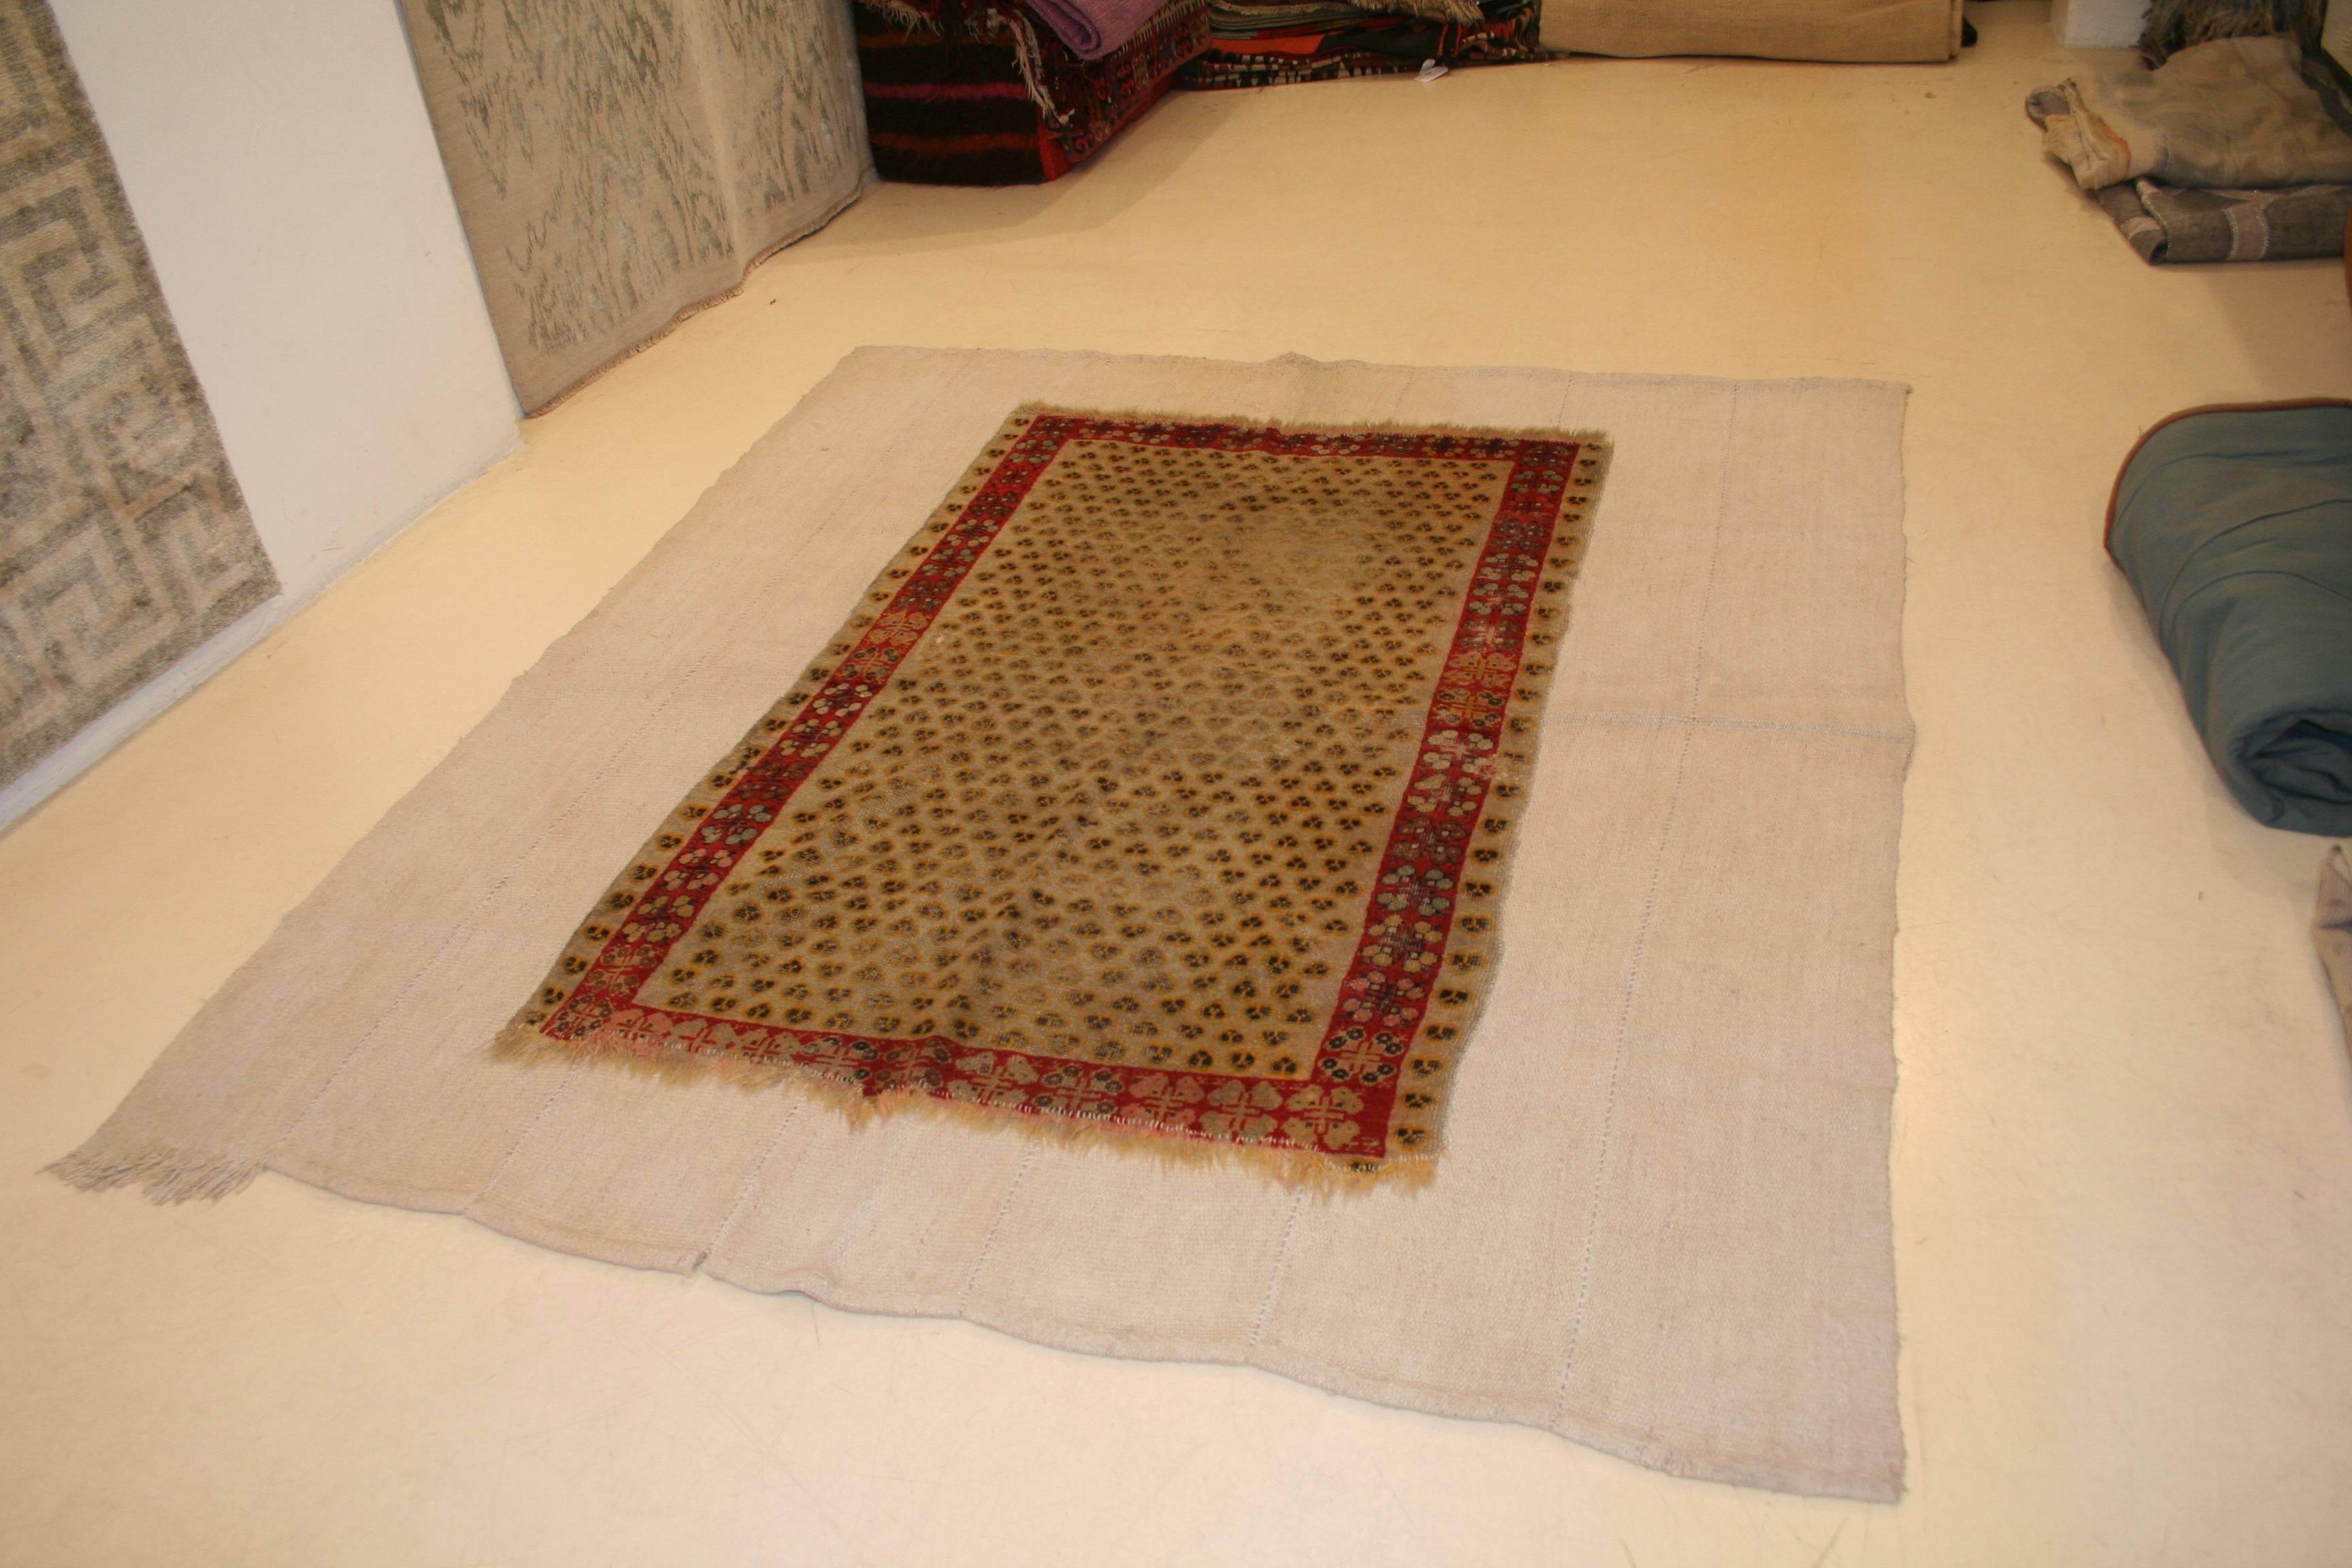 A fine antique Ghiordes rug distinguished by the rare pattern called 'Cintamani', originating from the Mongols and adopted as one of the favorite designs of the Ottoman court. The rug was stabilized 'as found' (unrestored) by hand stitching it onto